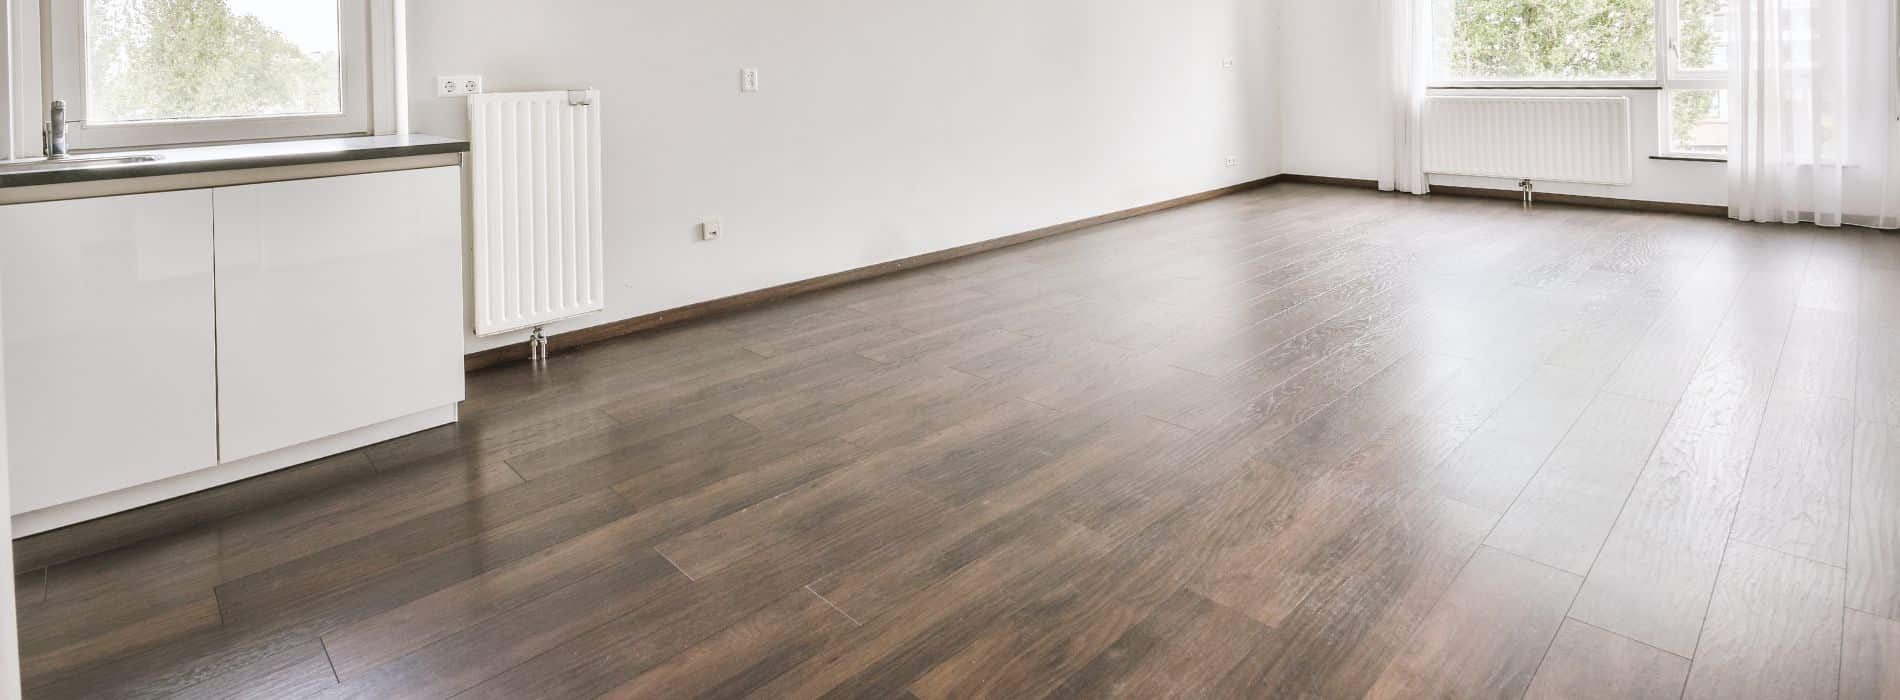 Impeccably refurbished 7-year-old hardwood floor in Whetstone, N20. Employing Bona 2.2K Frost whitewashing and Traffic HD 15% sheen matte lacquer, Mr Sander® have achieved an enduring and visually captivating outcome. 